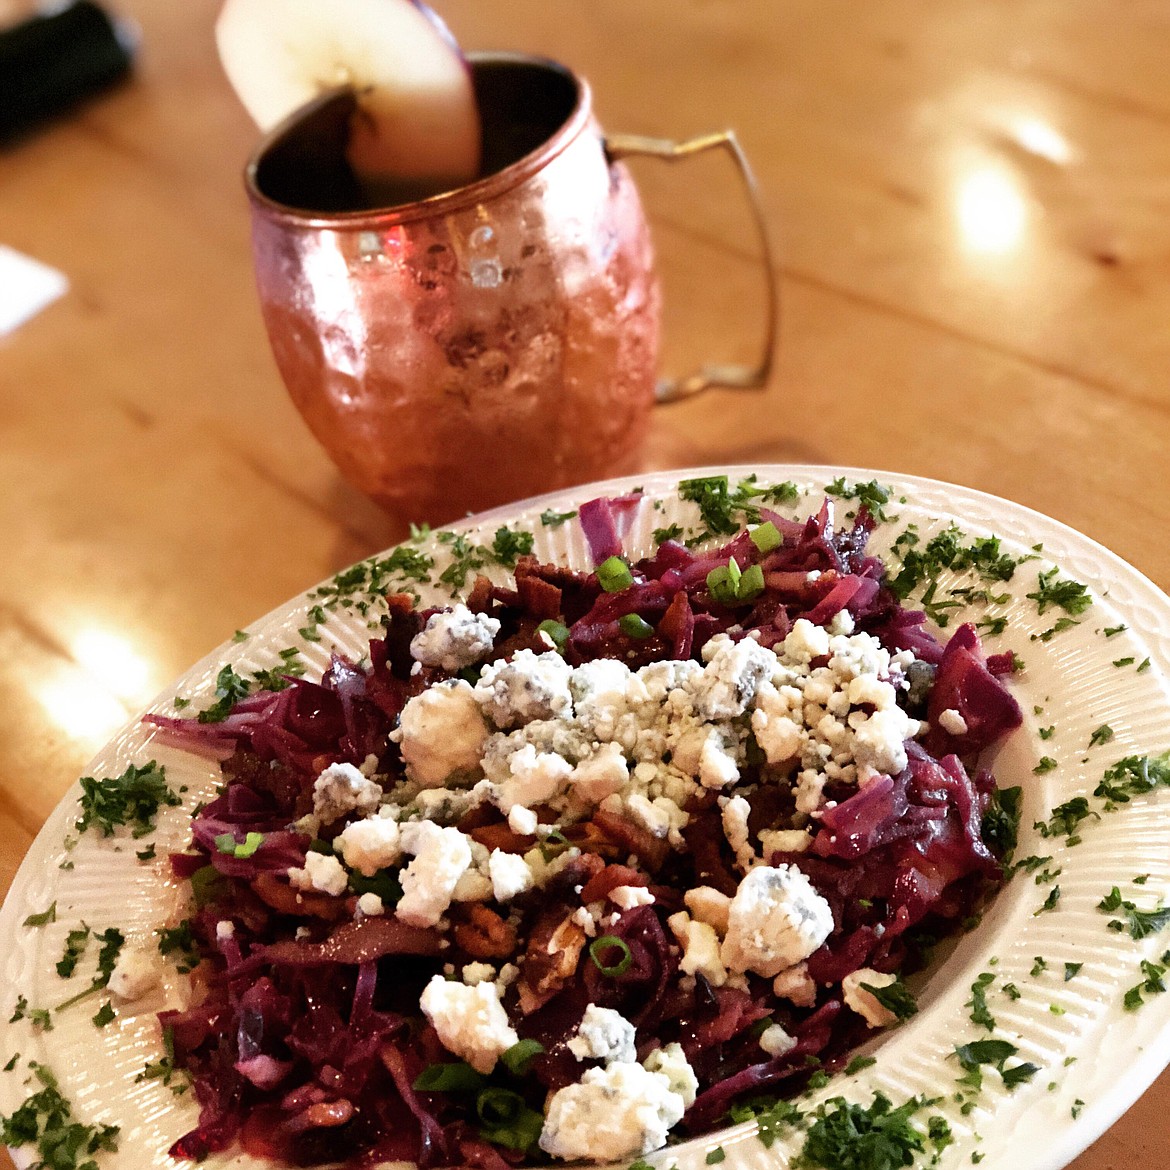 The Warm Red Cabbage Salad looked divine as it was served to diners awaiting a taste sensation.